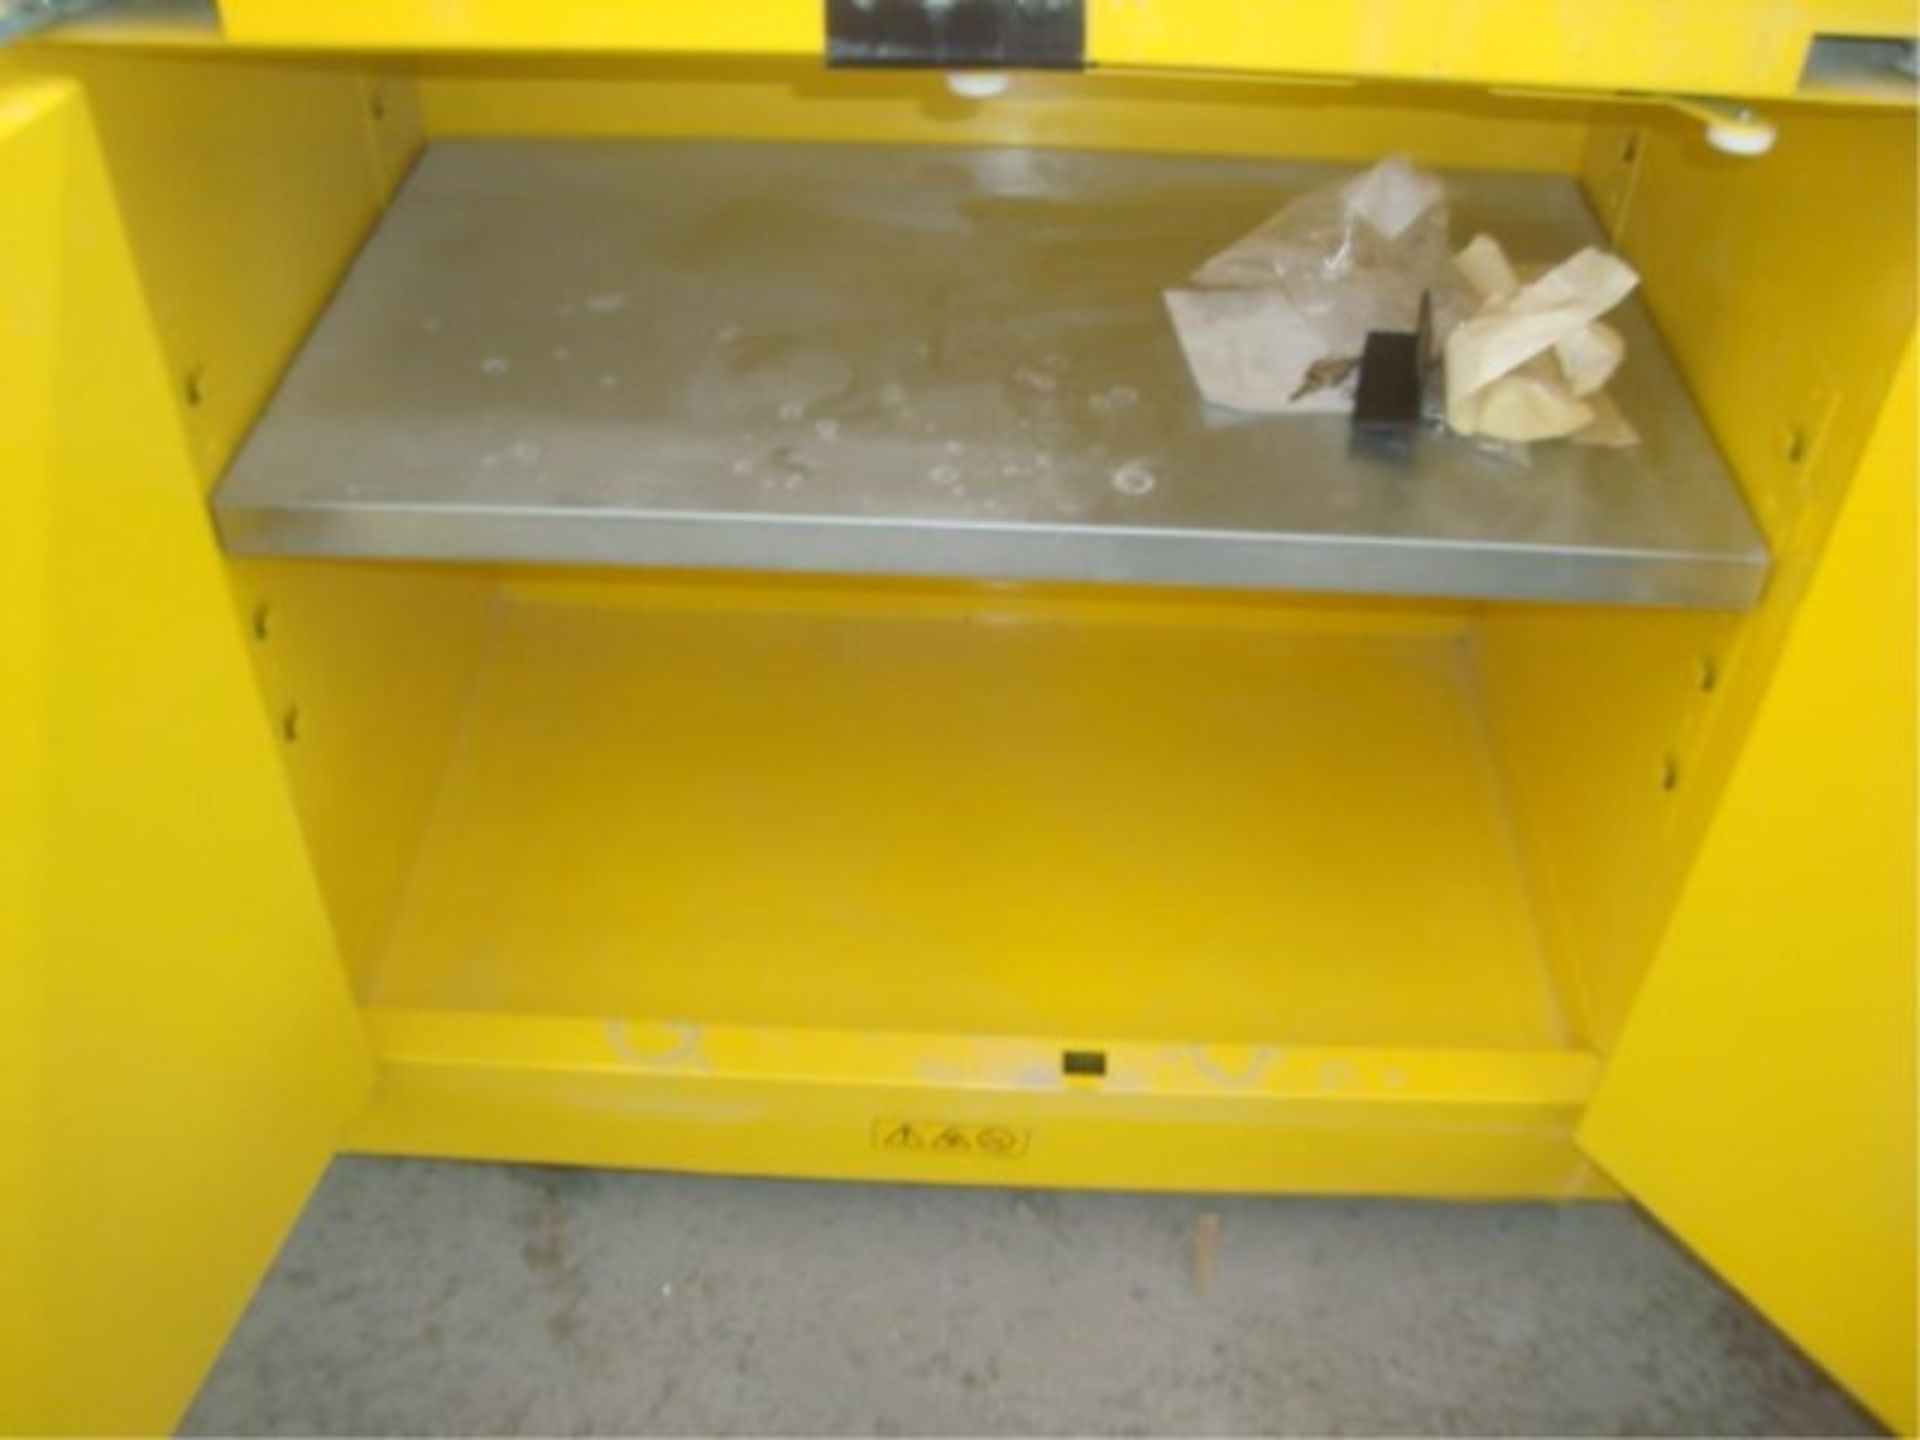 22-Gallon Capacity Flammables Cabinets - Image 2 of 8